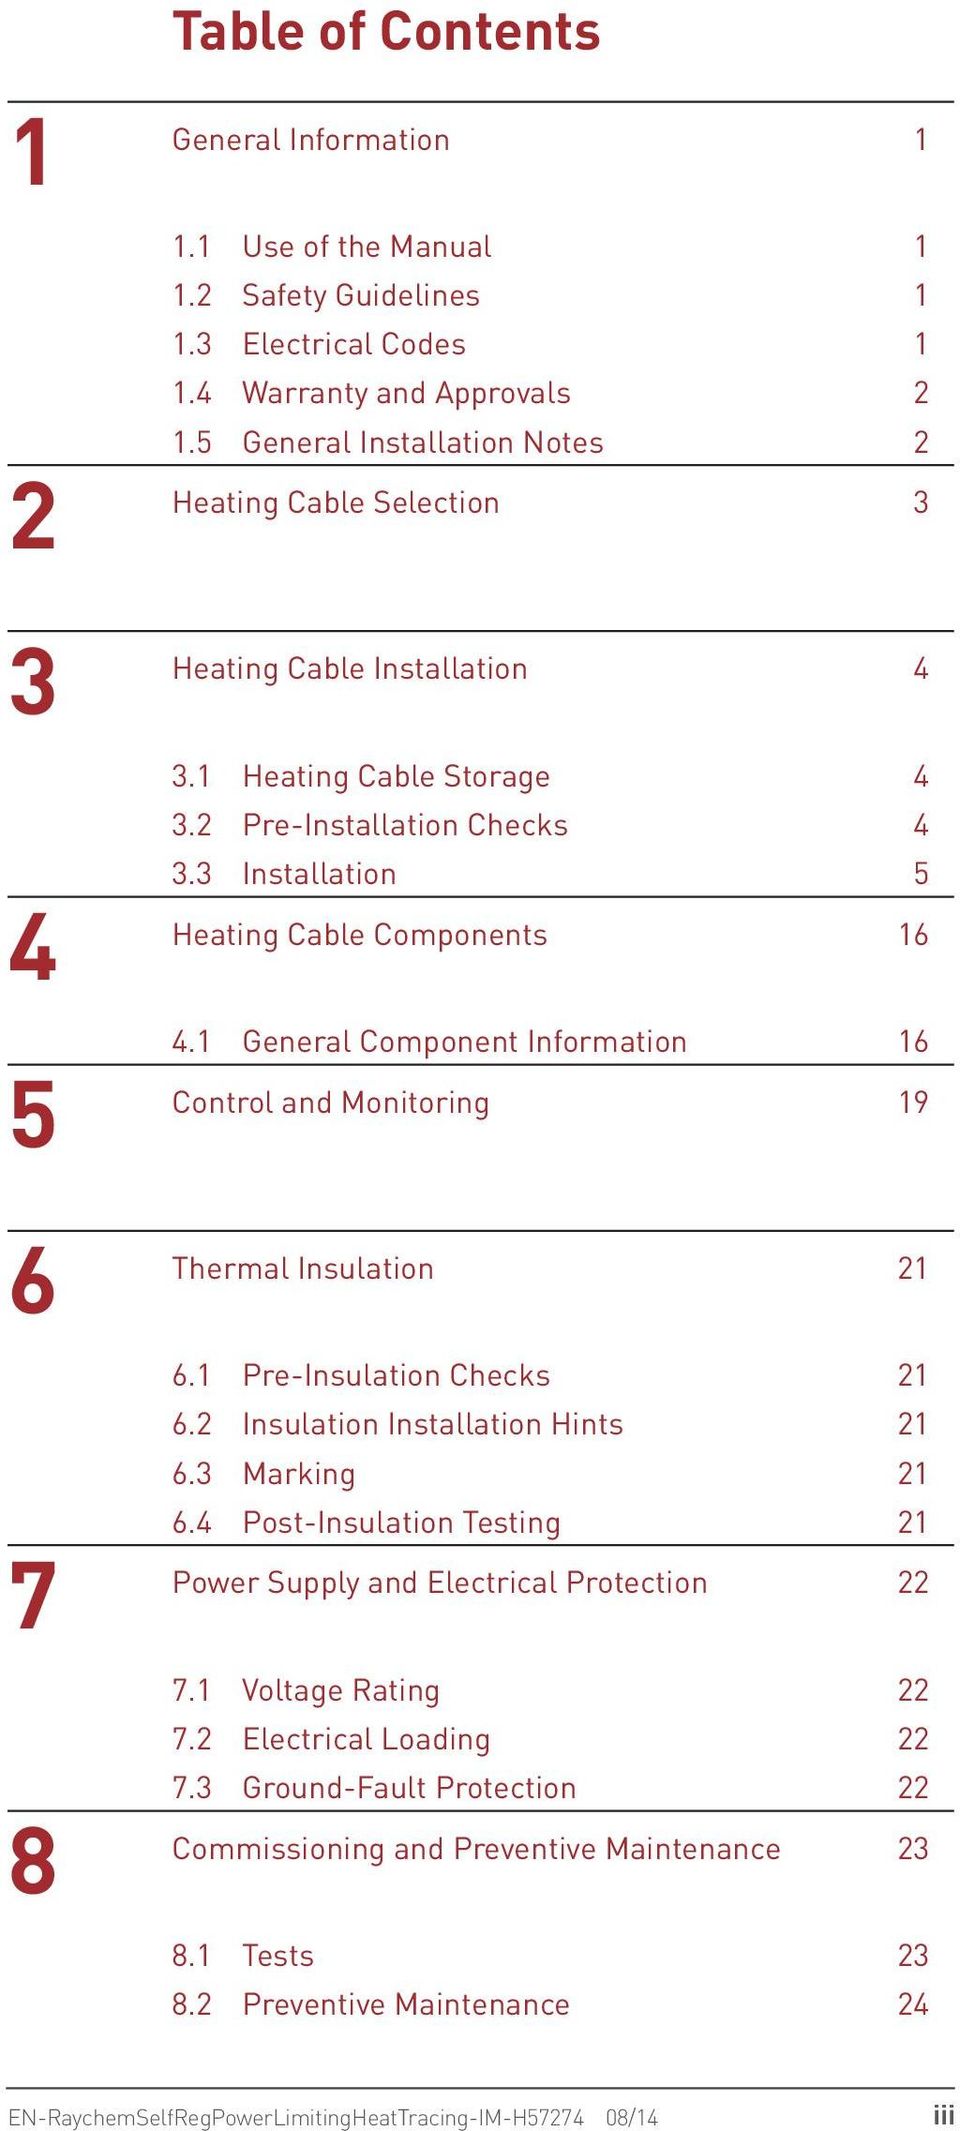 1 General Component Information 16 5 Control and Monitoring 19 6 Thermal Insulation 21 6.1 Pre-Insulation Checks 21 6.2 Insulation Installation Hints 21 6.3 Marking 21 6.